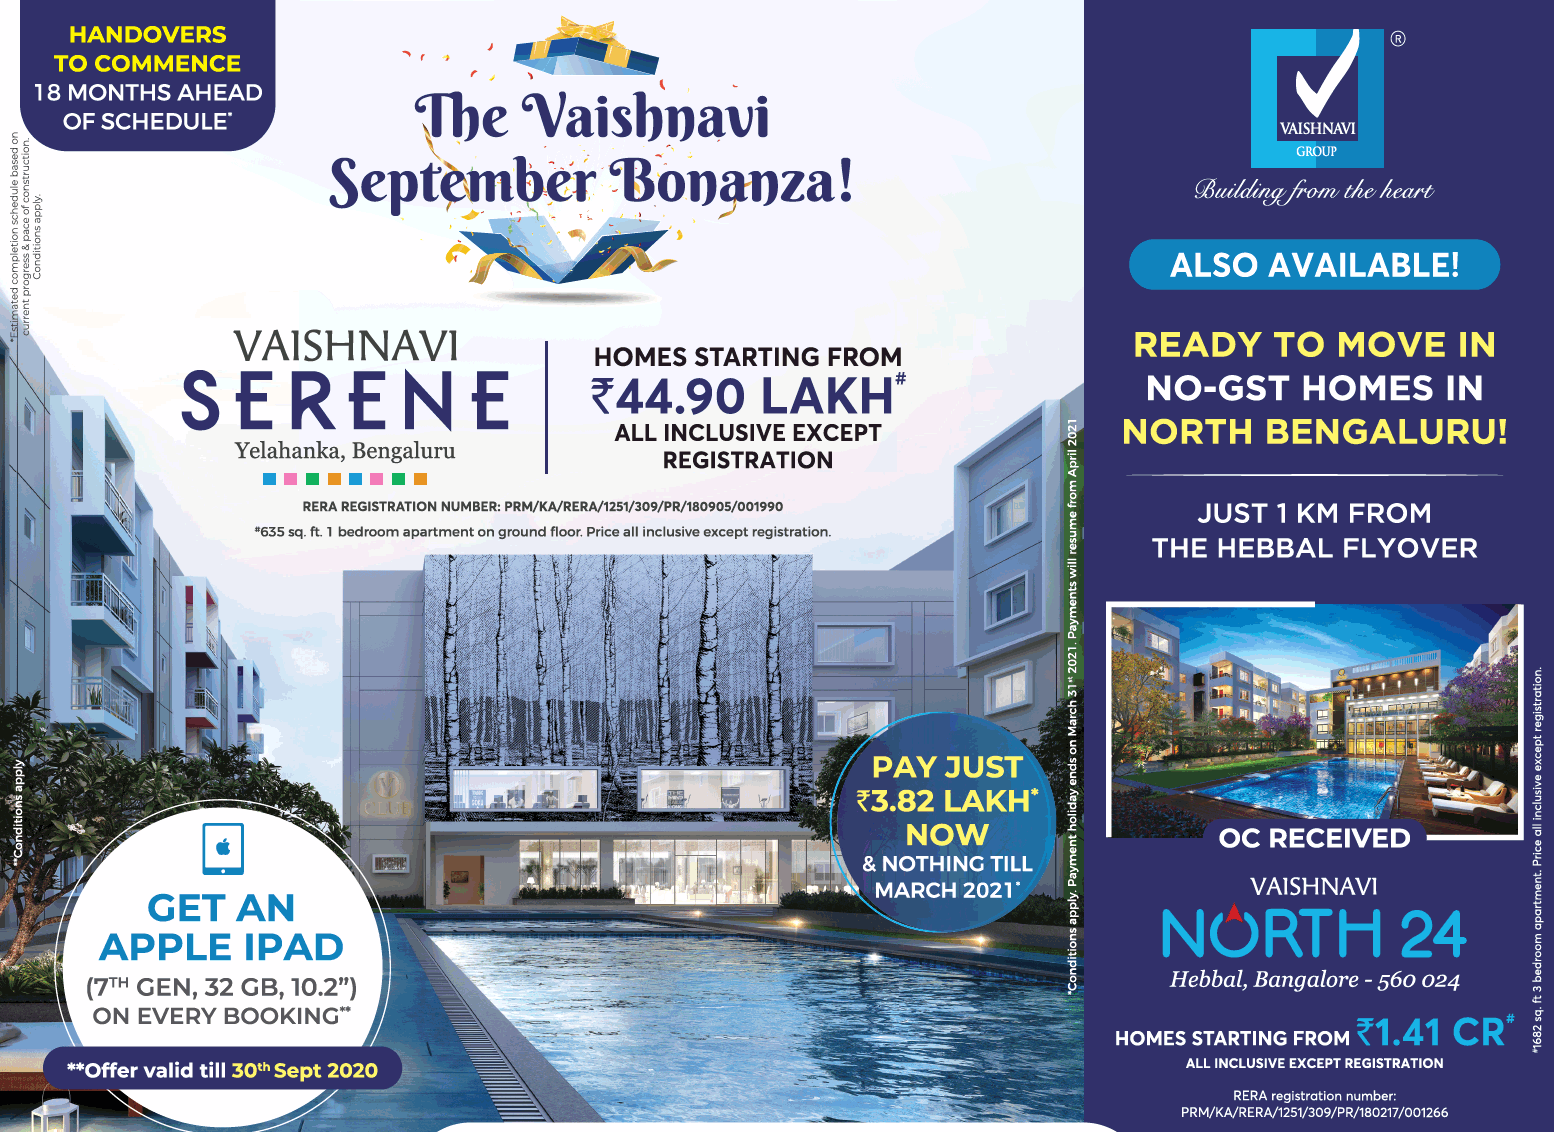 Handover to commence 18 months ahead of schedule at Vaishnavi Serene, Bangalore